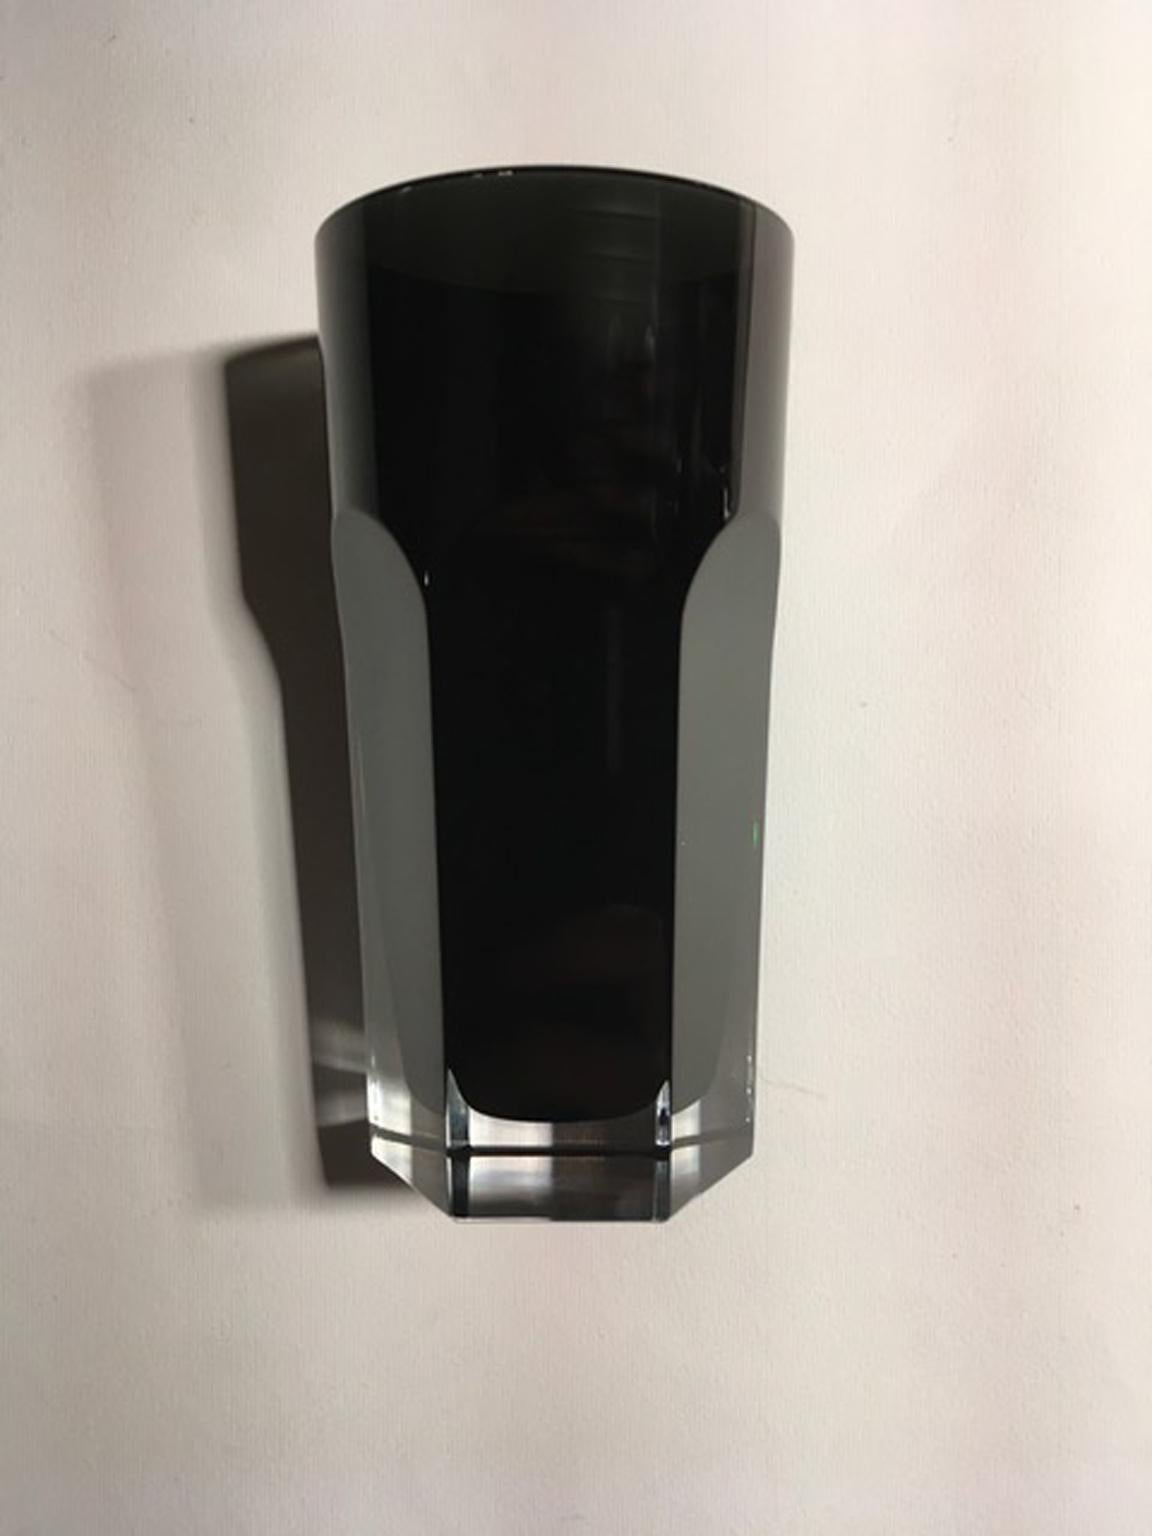 Baccarat numbered limited edition Black Crystal by Philippe Stark glass or little vase in Stock N. 000

This is a one of a kind piece: this is the first piece produced of this limited edition designed by Philippe Starck in 2008 when Starck created